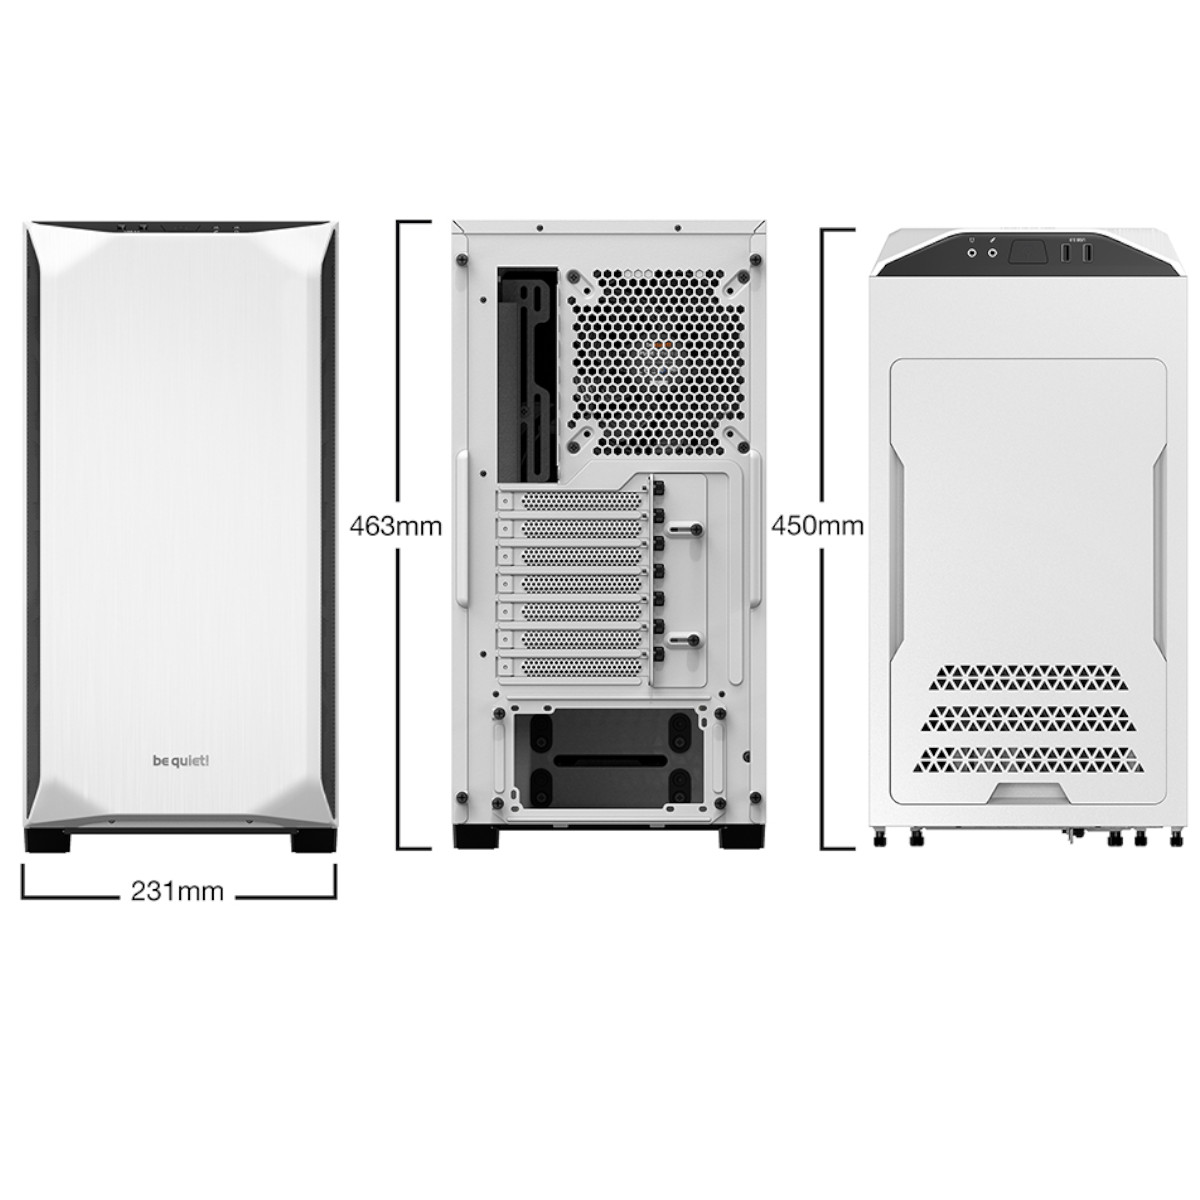 be quiet! - be quiet! Pure Base 500 Midi Tower Case - White